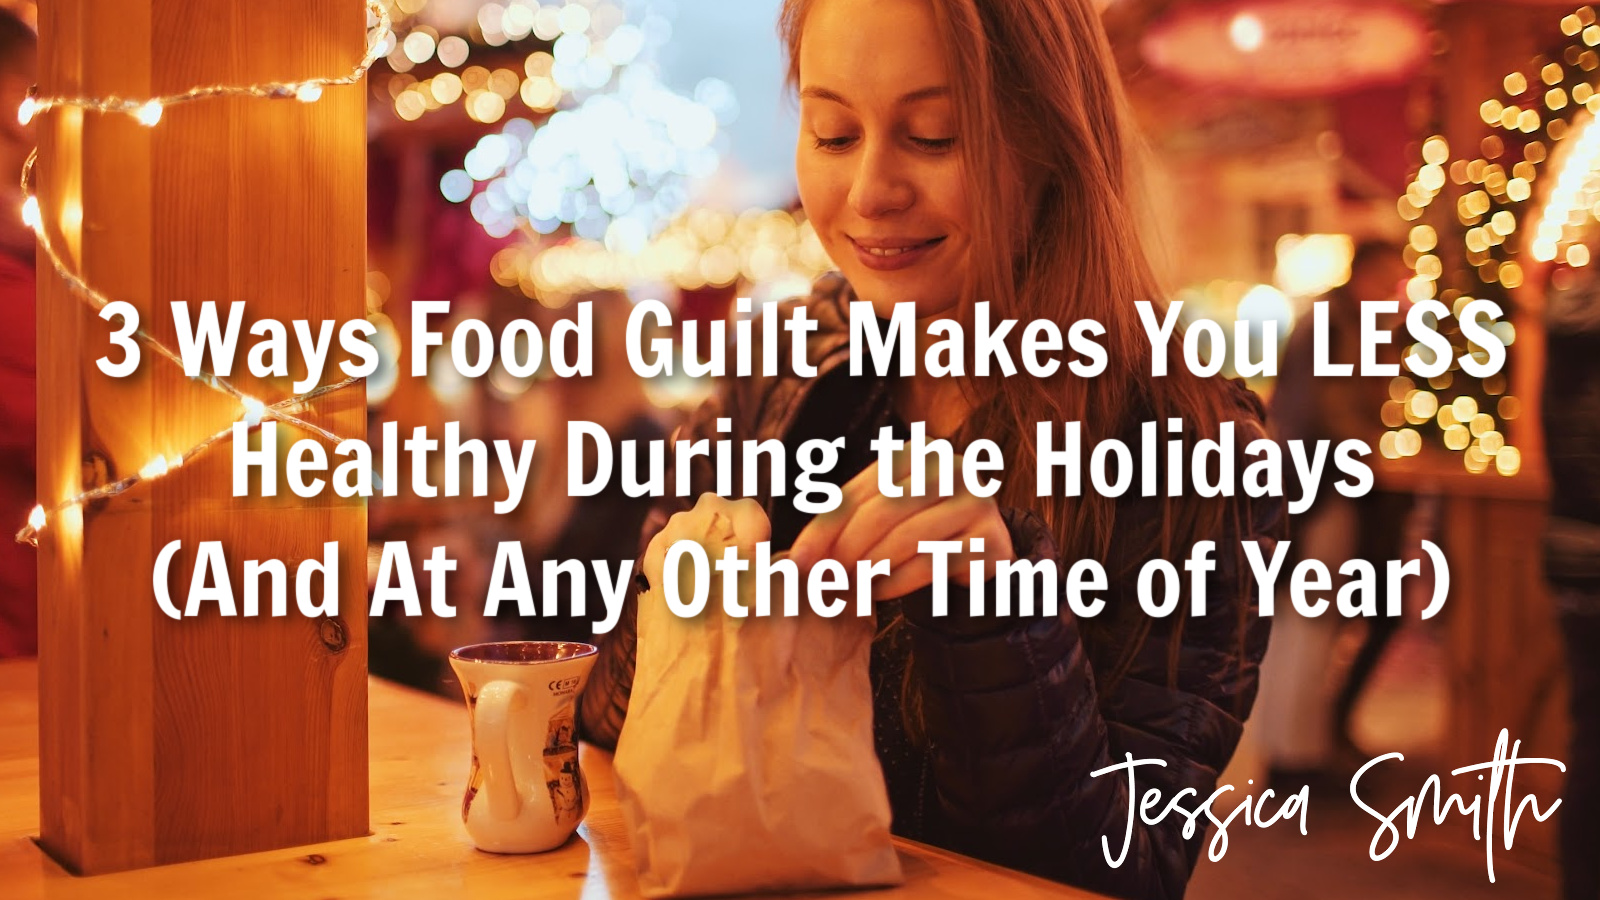 3 Ways Food Guilt Makes You LESS Healthy During the Holidays (And At Any Other Time of Year)